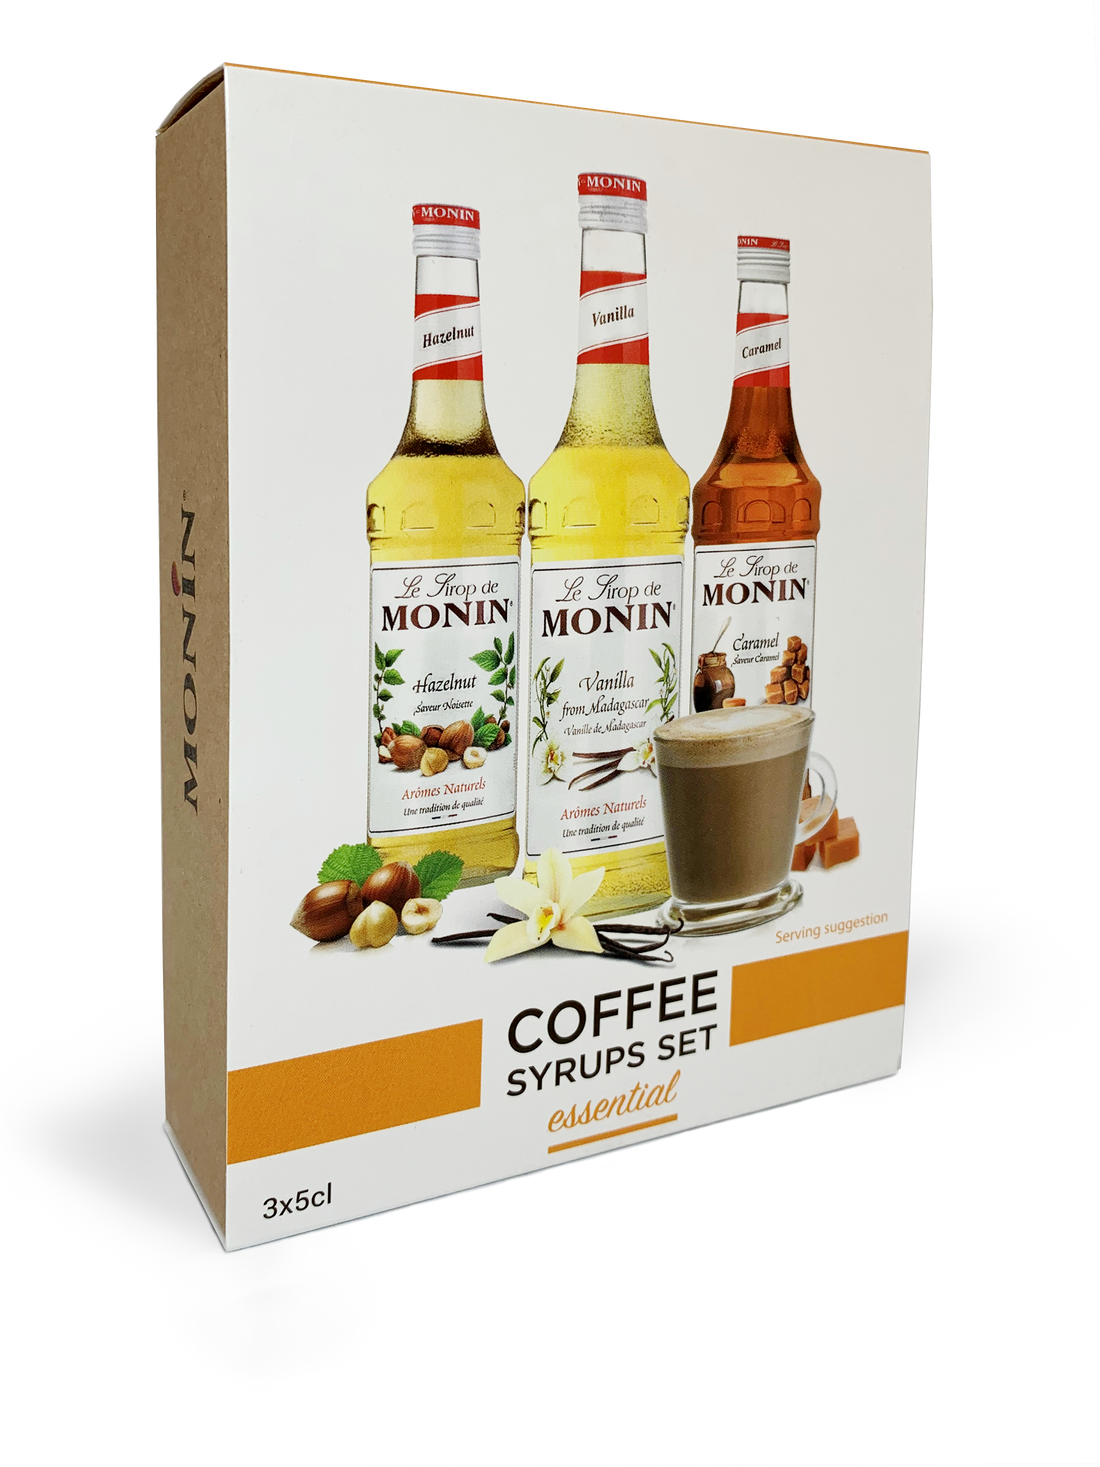 Buy MONIN Coffee Syrup Gift Set. It delivers the fresh taste and aroma of hazelnut with a touch of almond and vanilla.